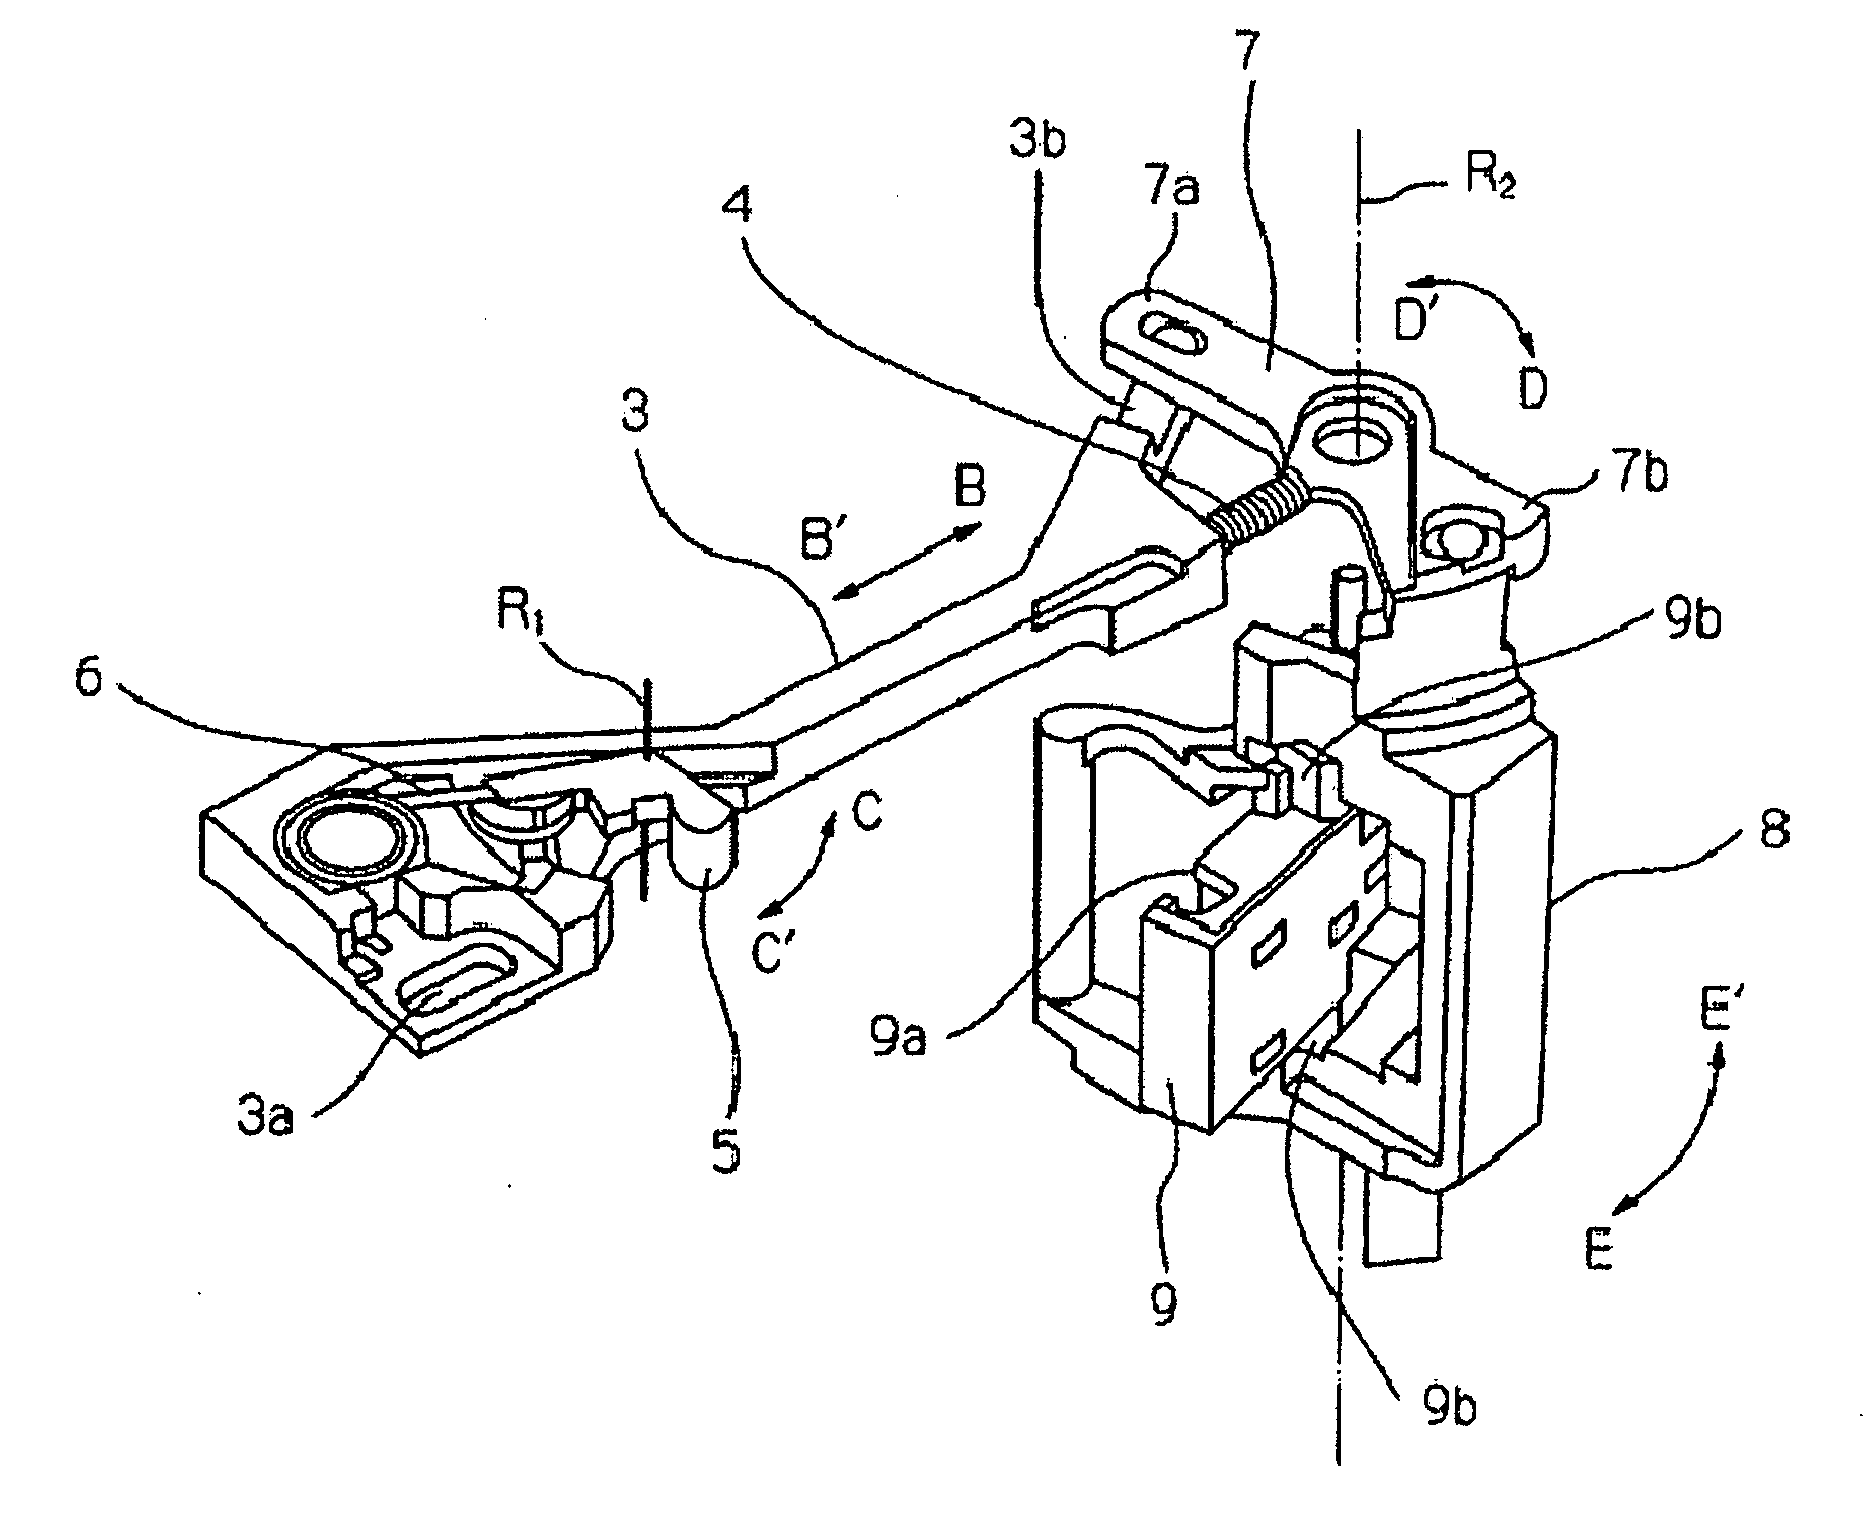 Apparatus for threading a tape from a cartridge